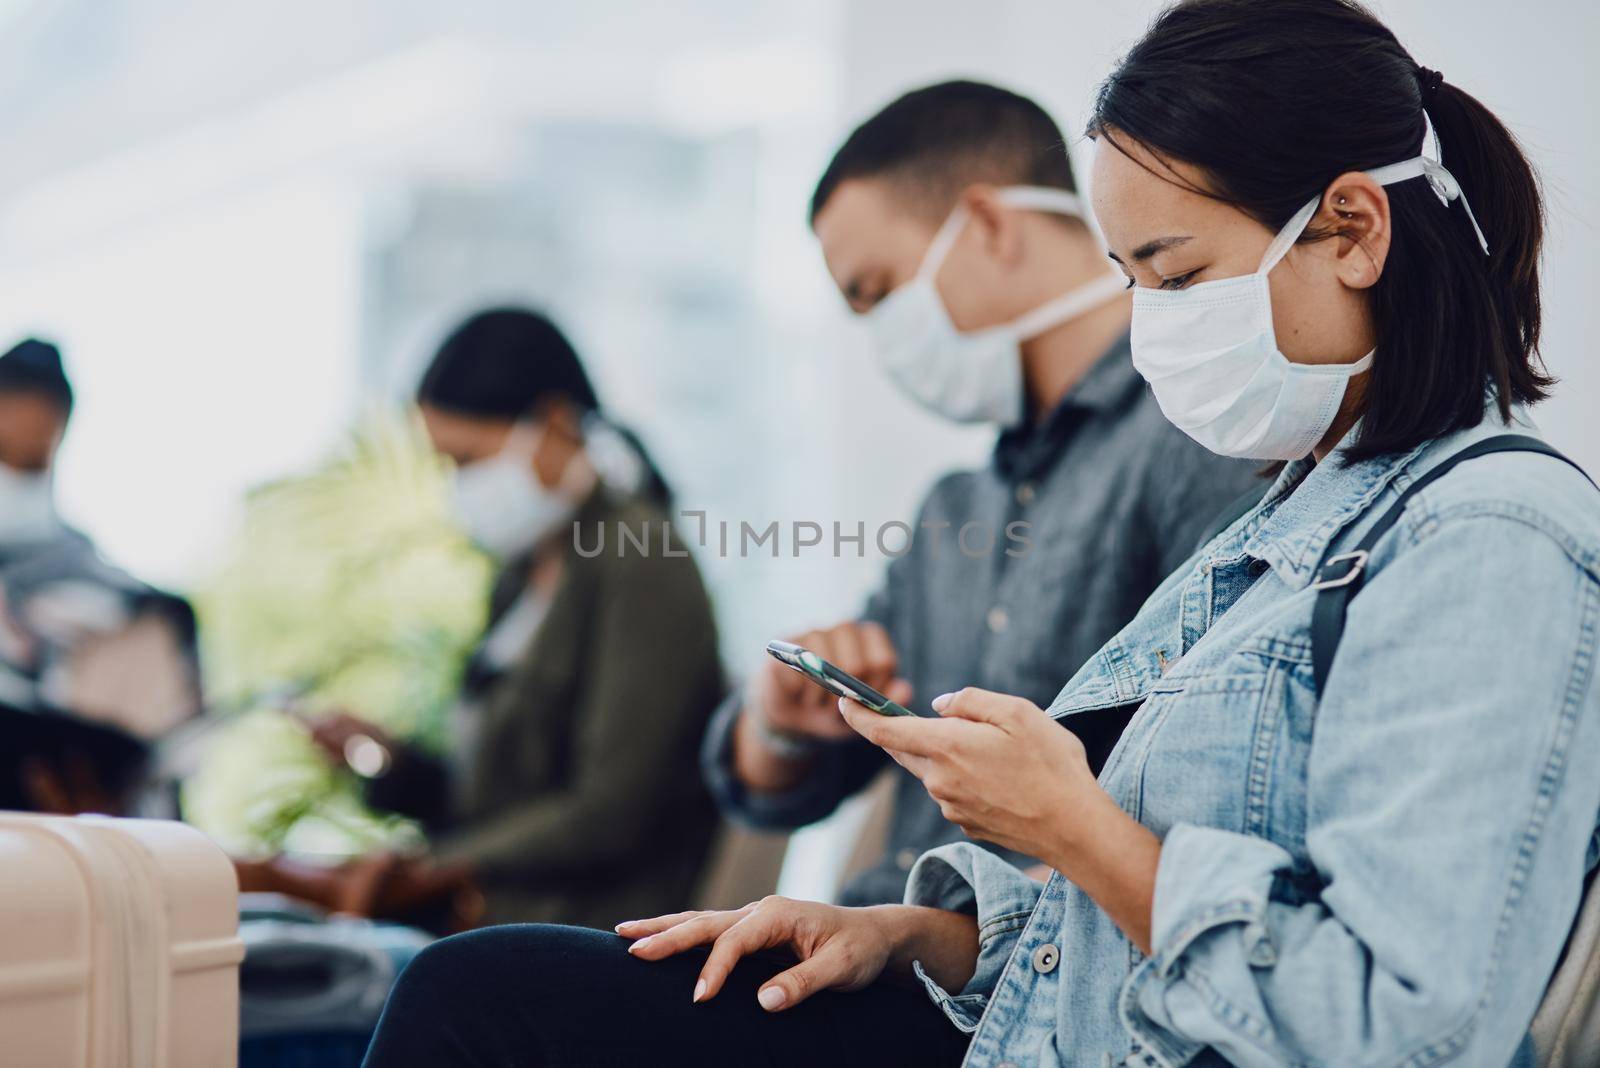 Female tourist on phone traveling during covid at airport waiting for departure, wearing a mask for protection. For hygiene and healthcare security, follow corona virus social distance regulations. by YuriArcurs